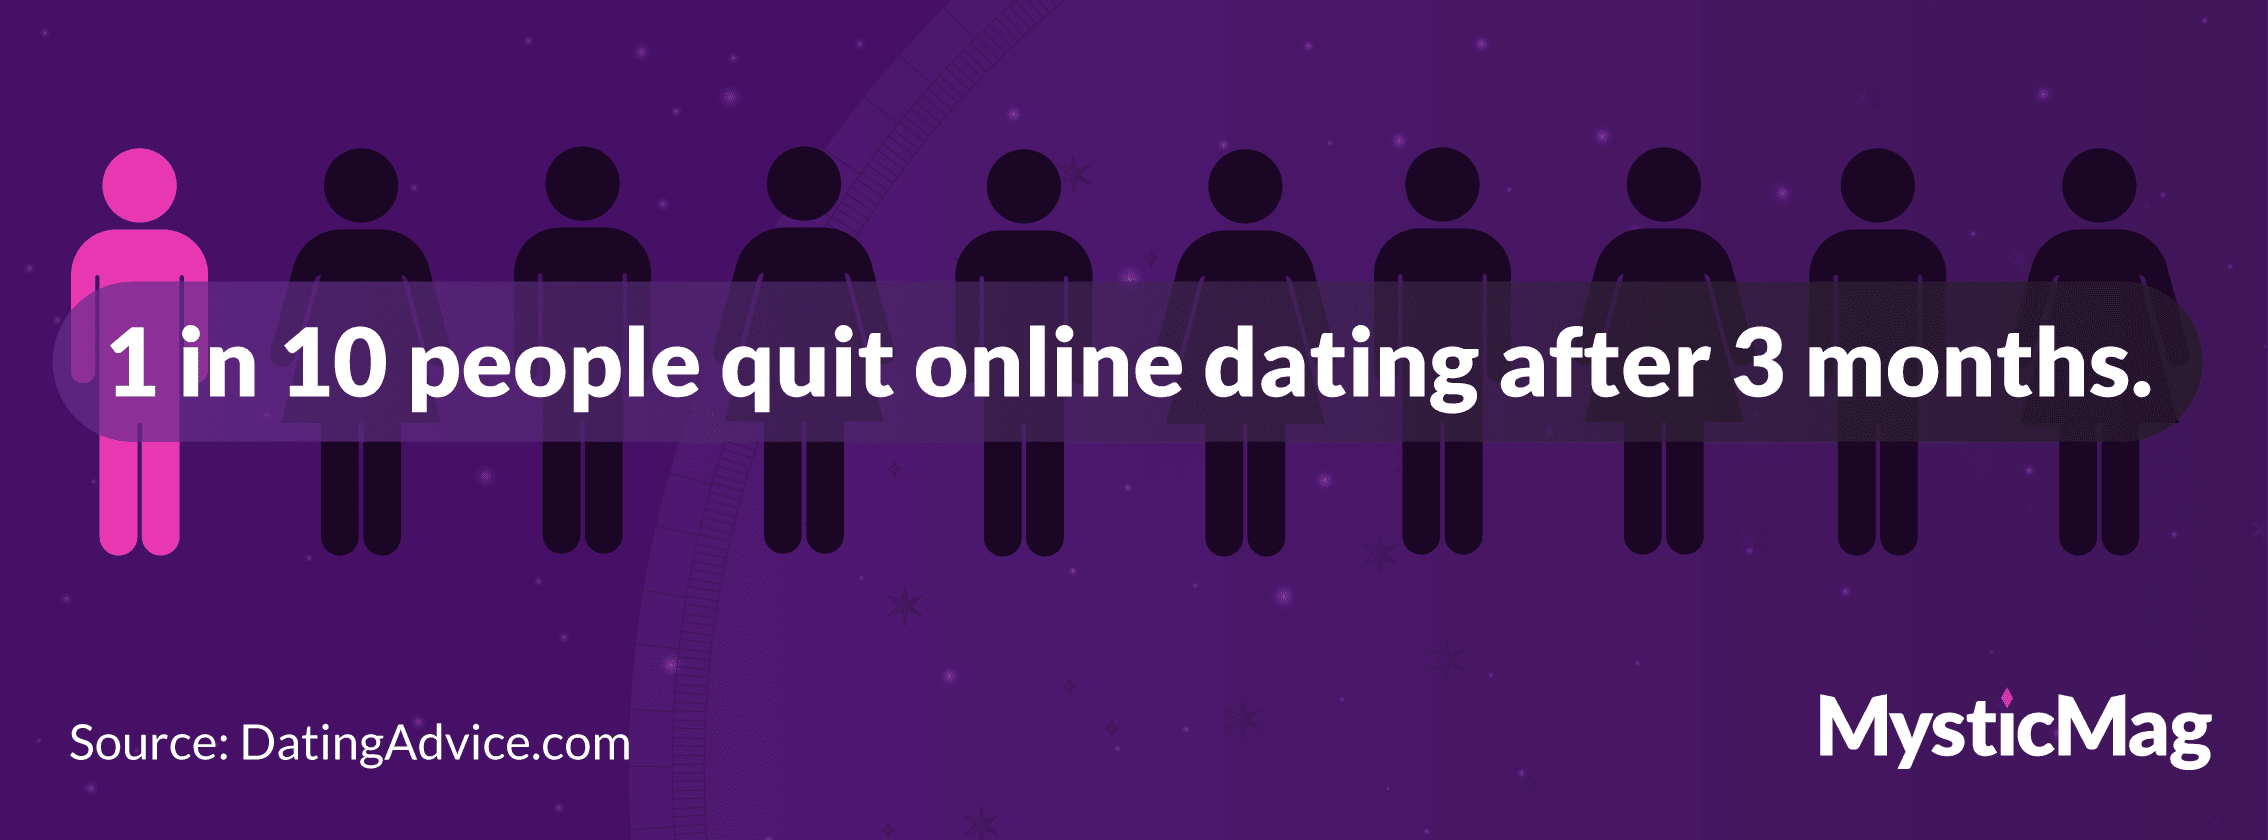 10% of online daters quit within 3 months